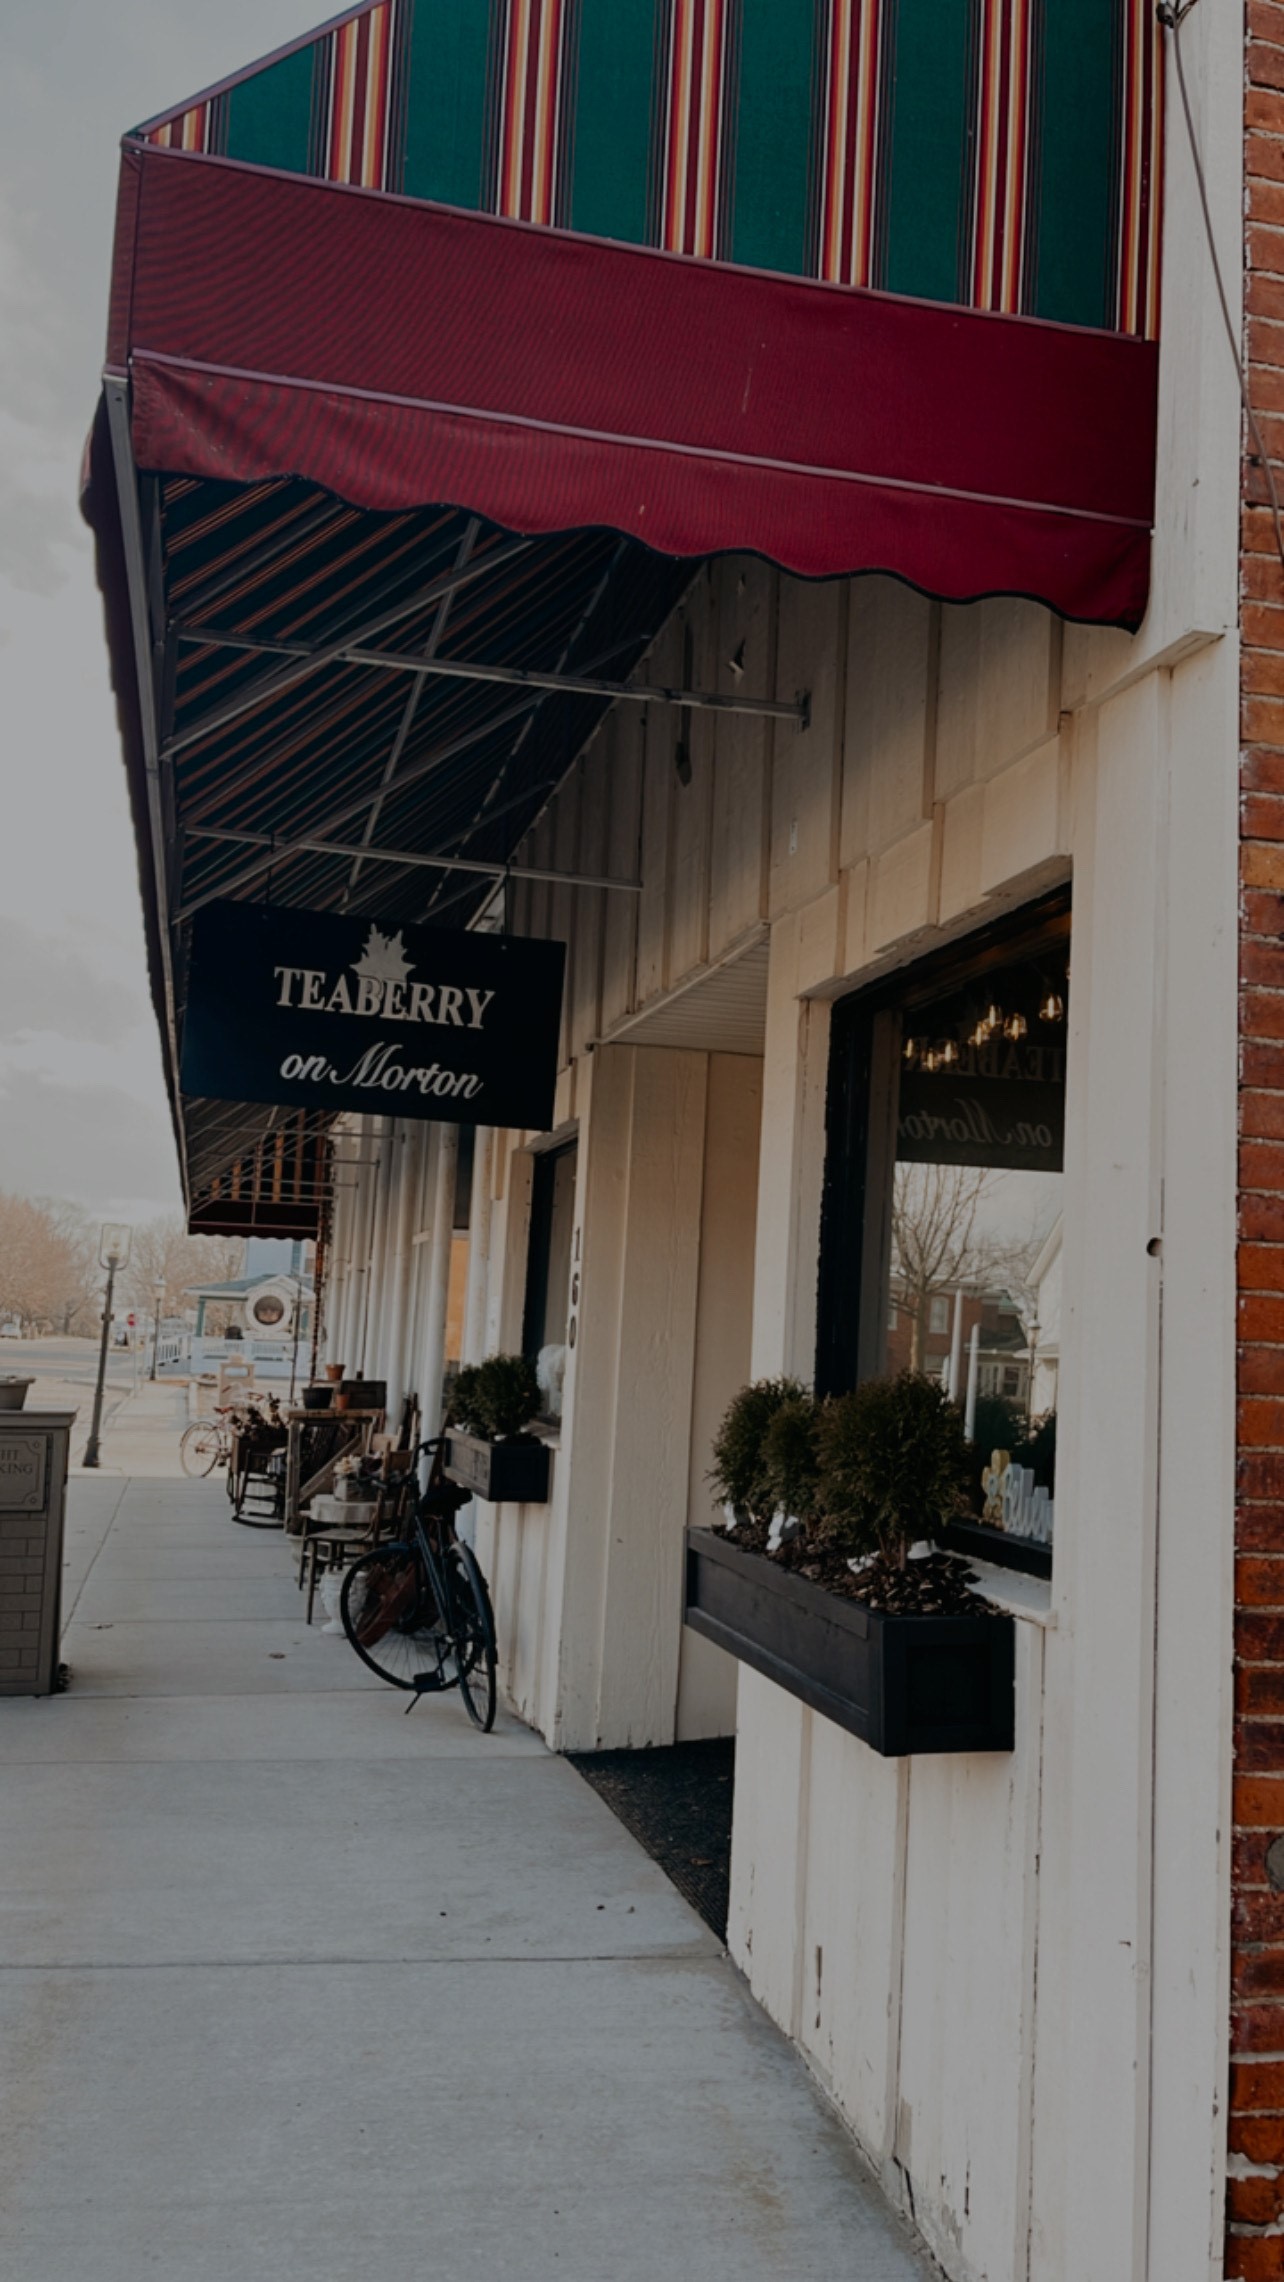 Teaberry on Morton storefront